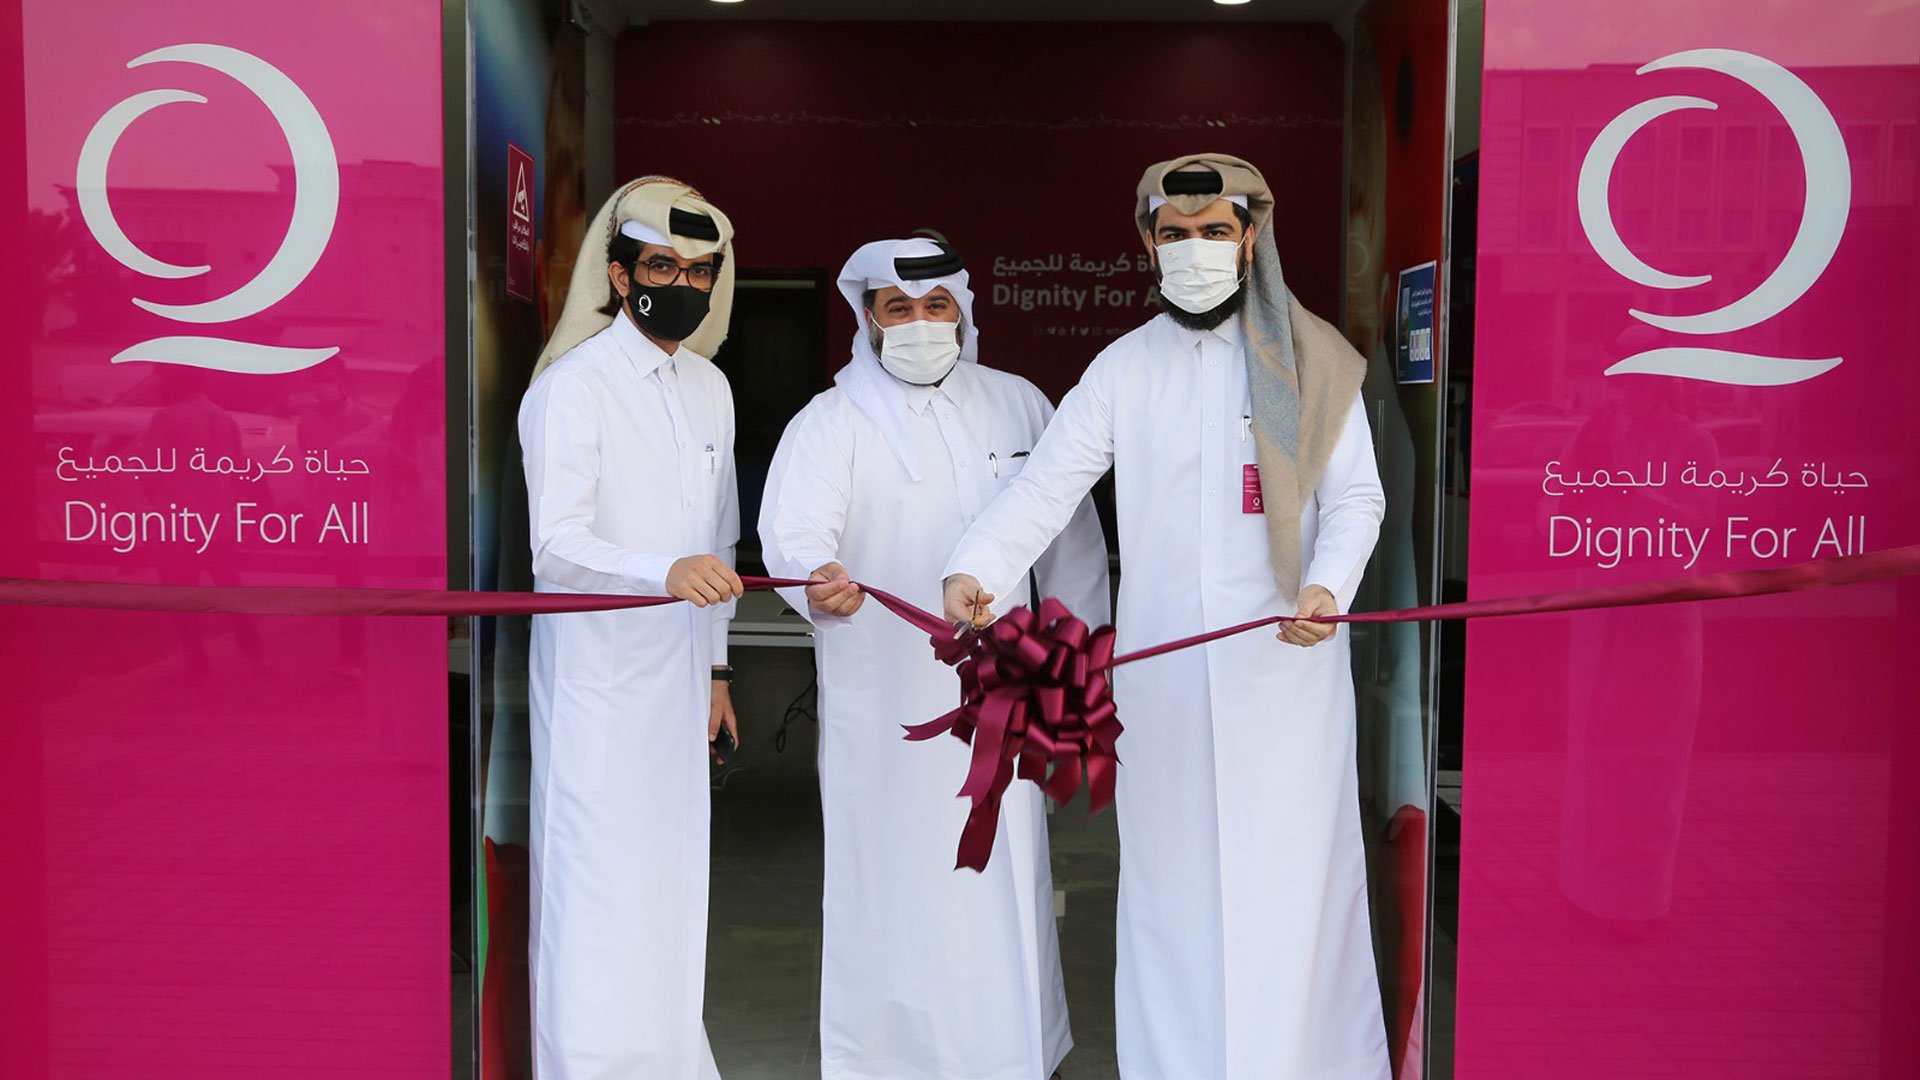 Qatar Charity Opens Two New Branches Locally